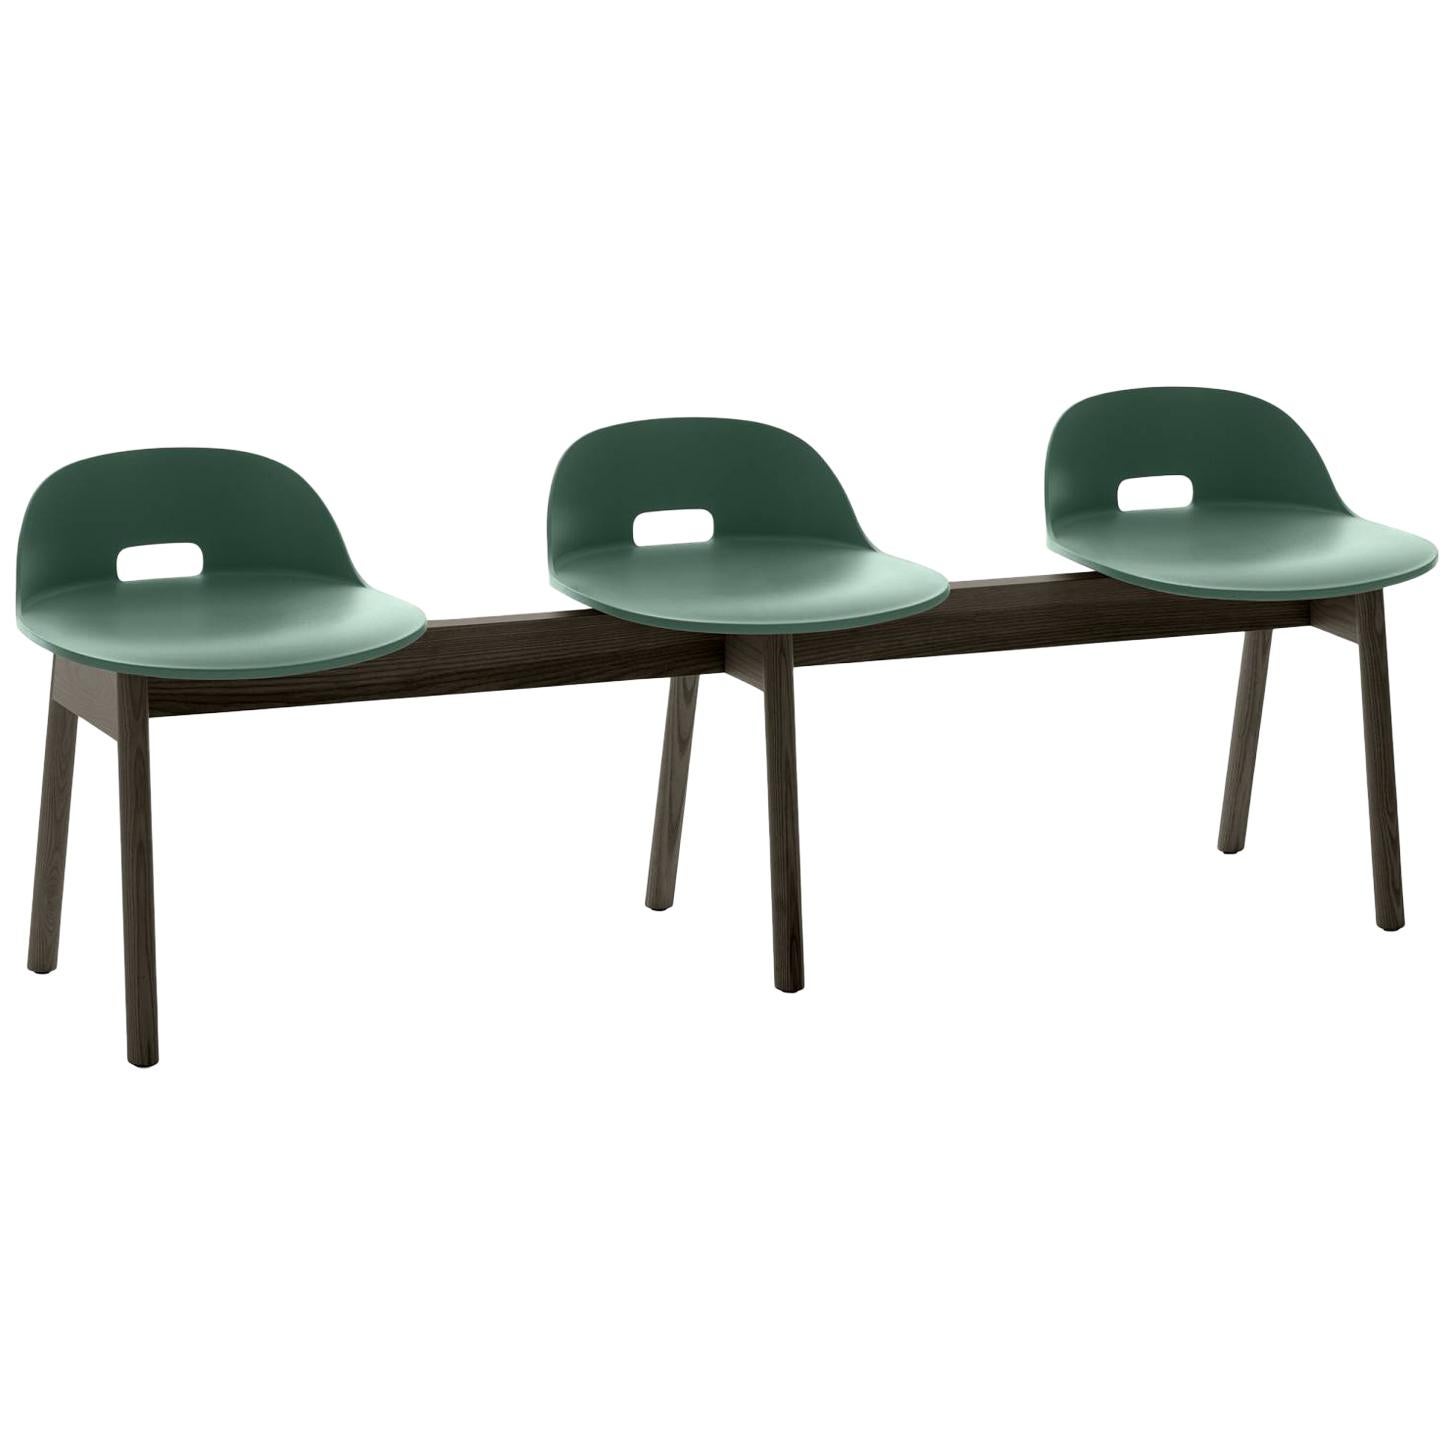 Emeco Alfi 3-Seat Bench in Green and Dark Ash with Low Back by Jasper Morrison